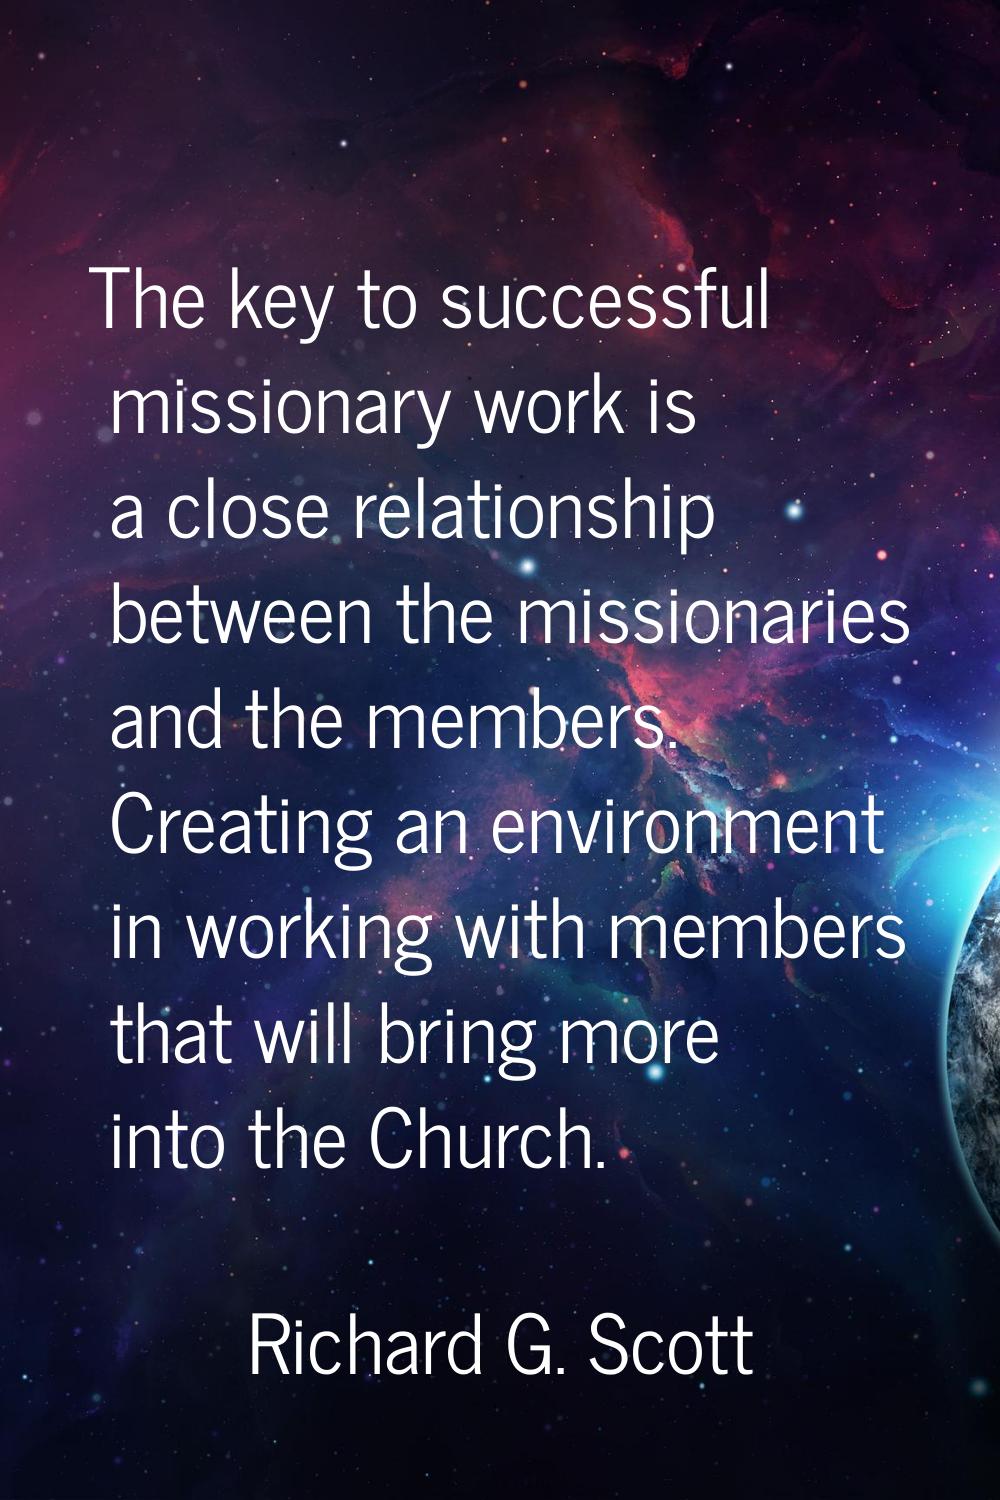 The key to successful missionary work is a close relationship between the missionaries and the memb